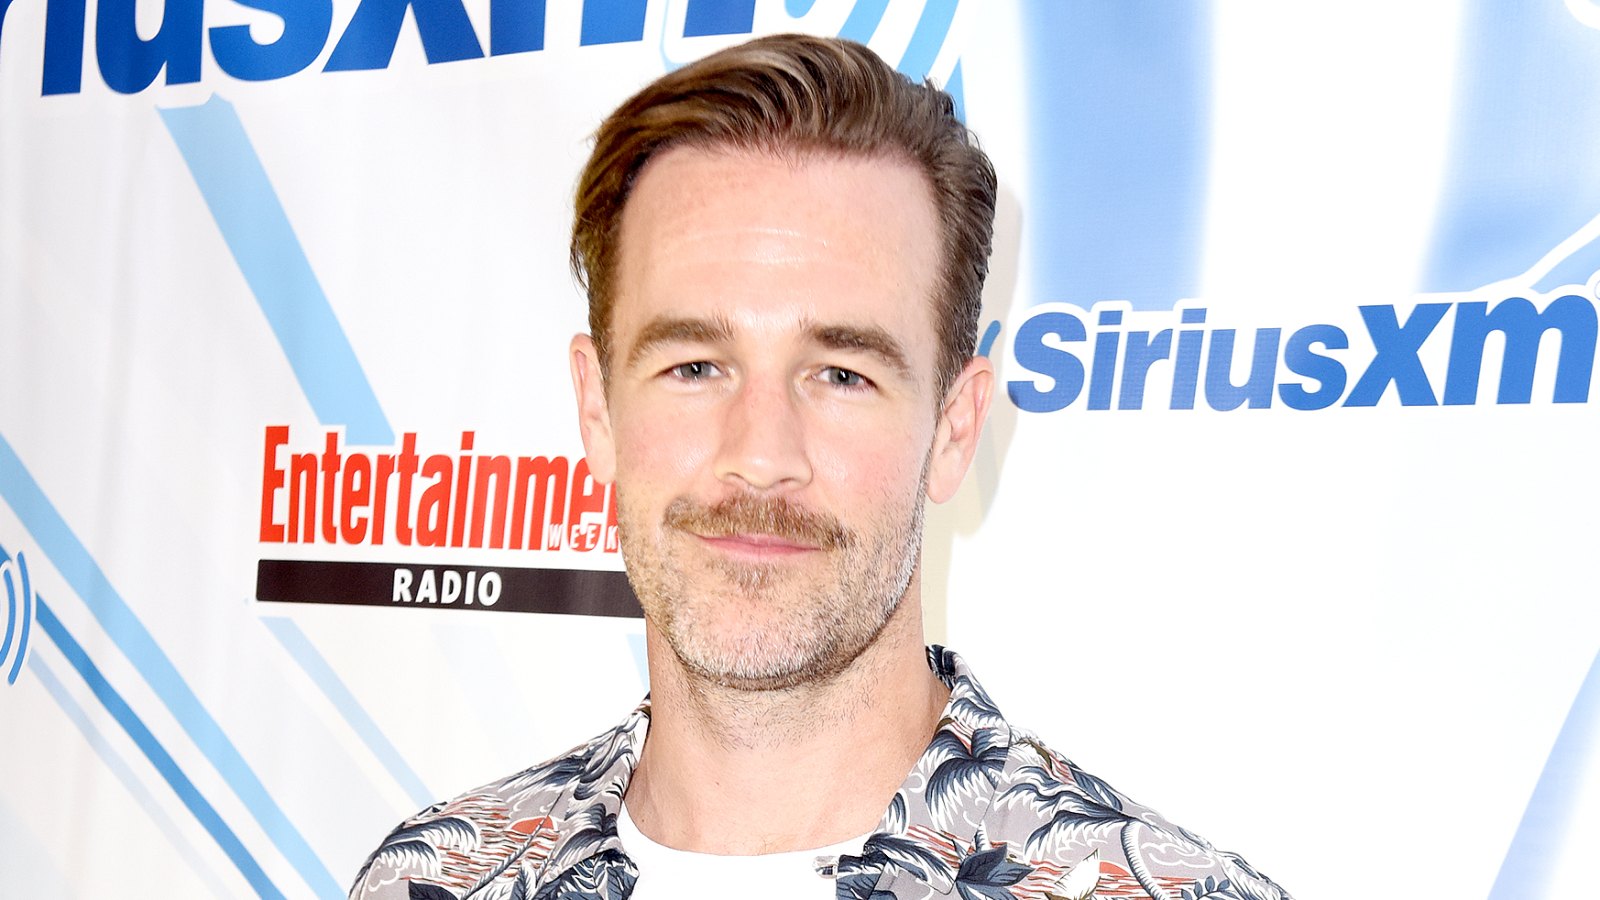 James Van Der Beek attends SiriusXM's Entertainment Weekly Radio Channel Broadcasts From Comic Con 2017 at Hard Rock Hotel San Diego on July 21, 2017 in San Diego, California.